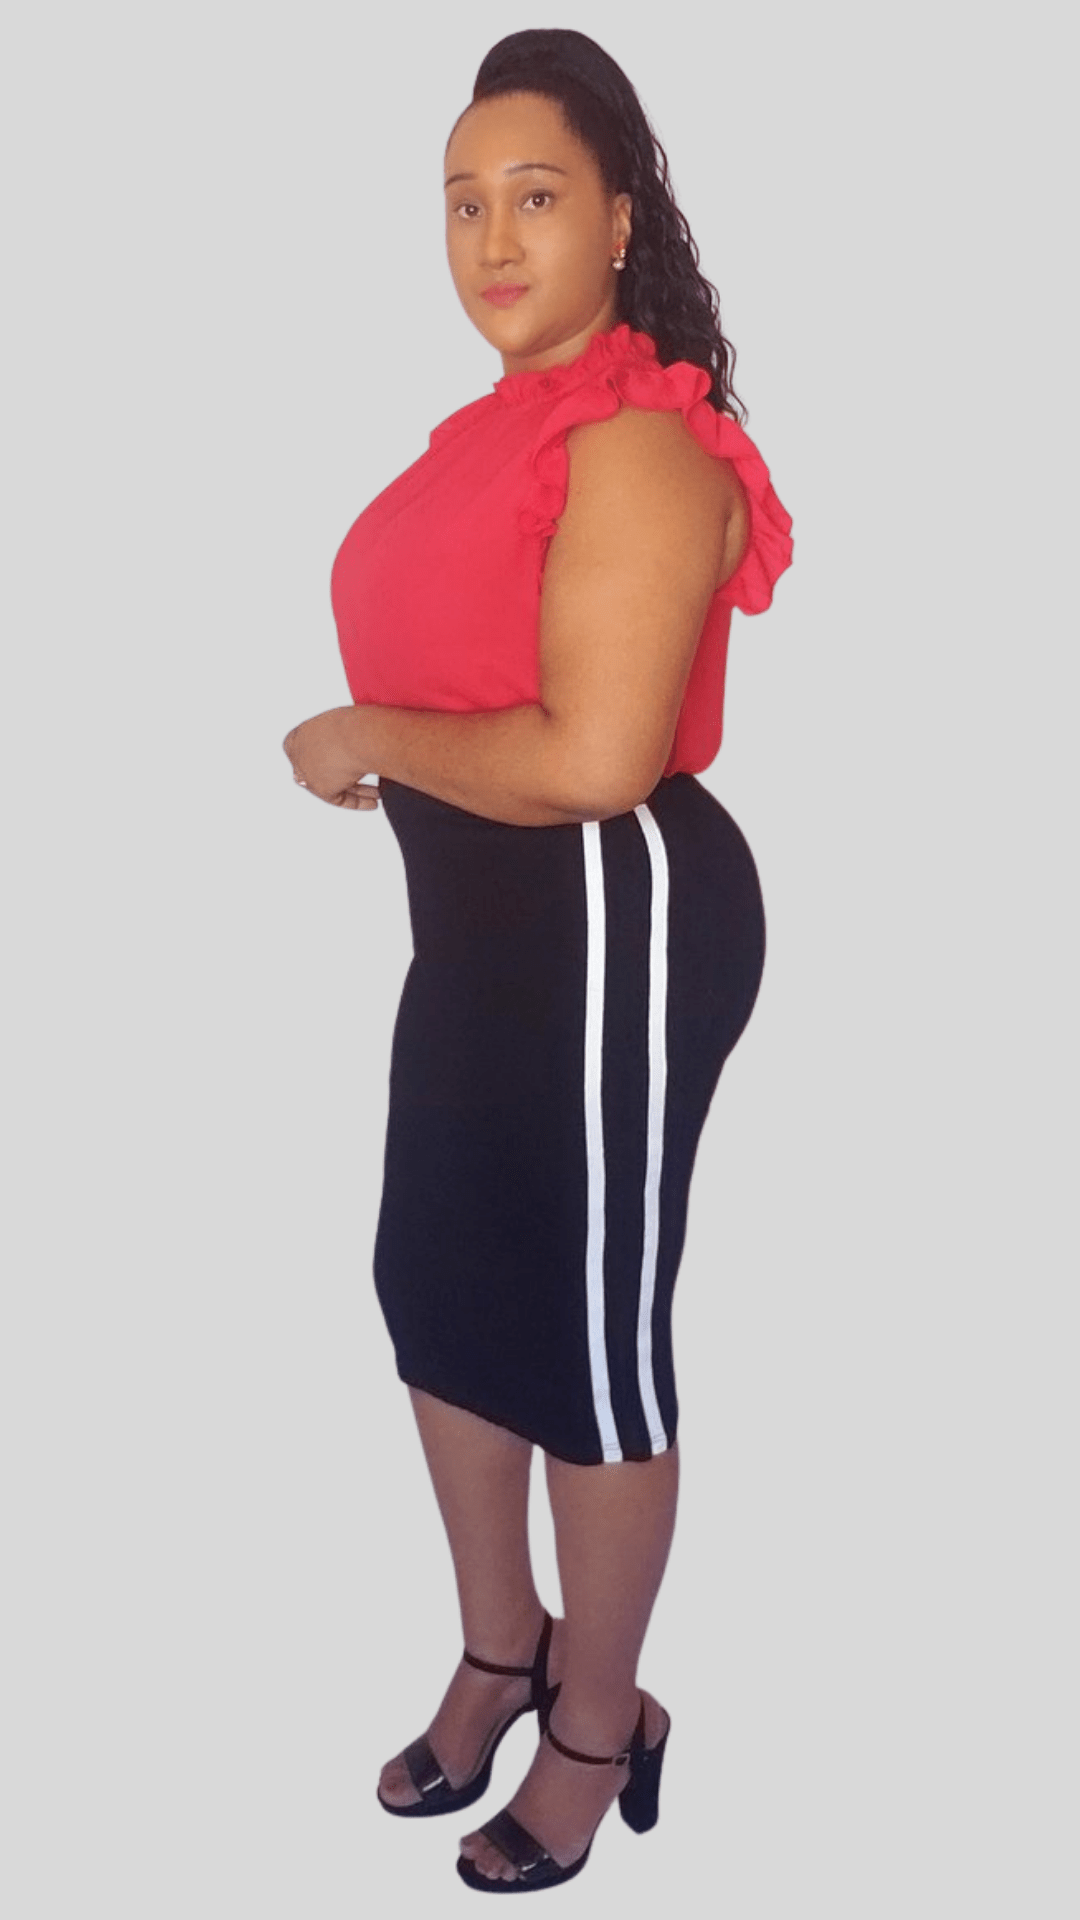 Mid-size Black and White Stretchy Skirt